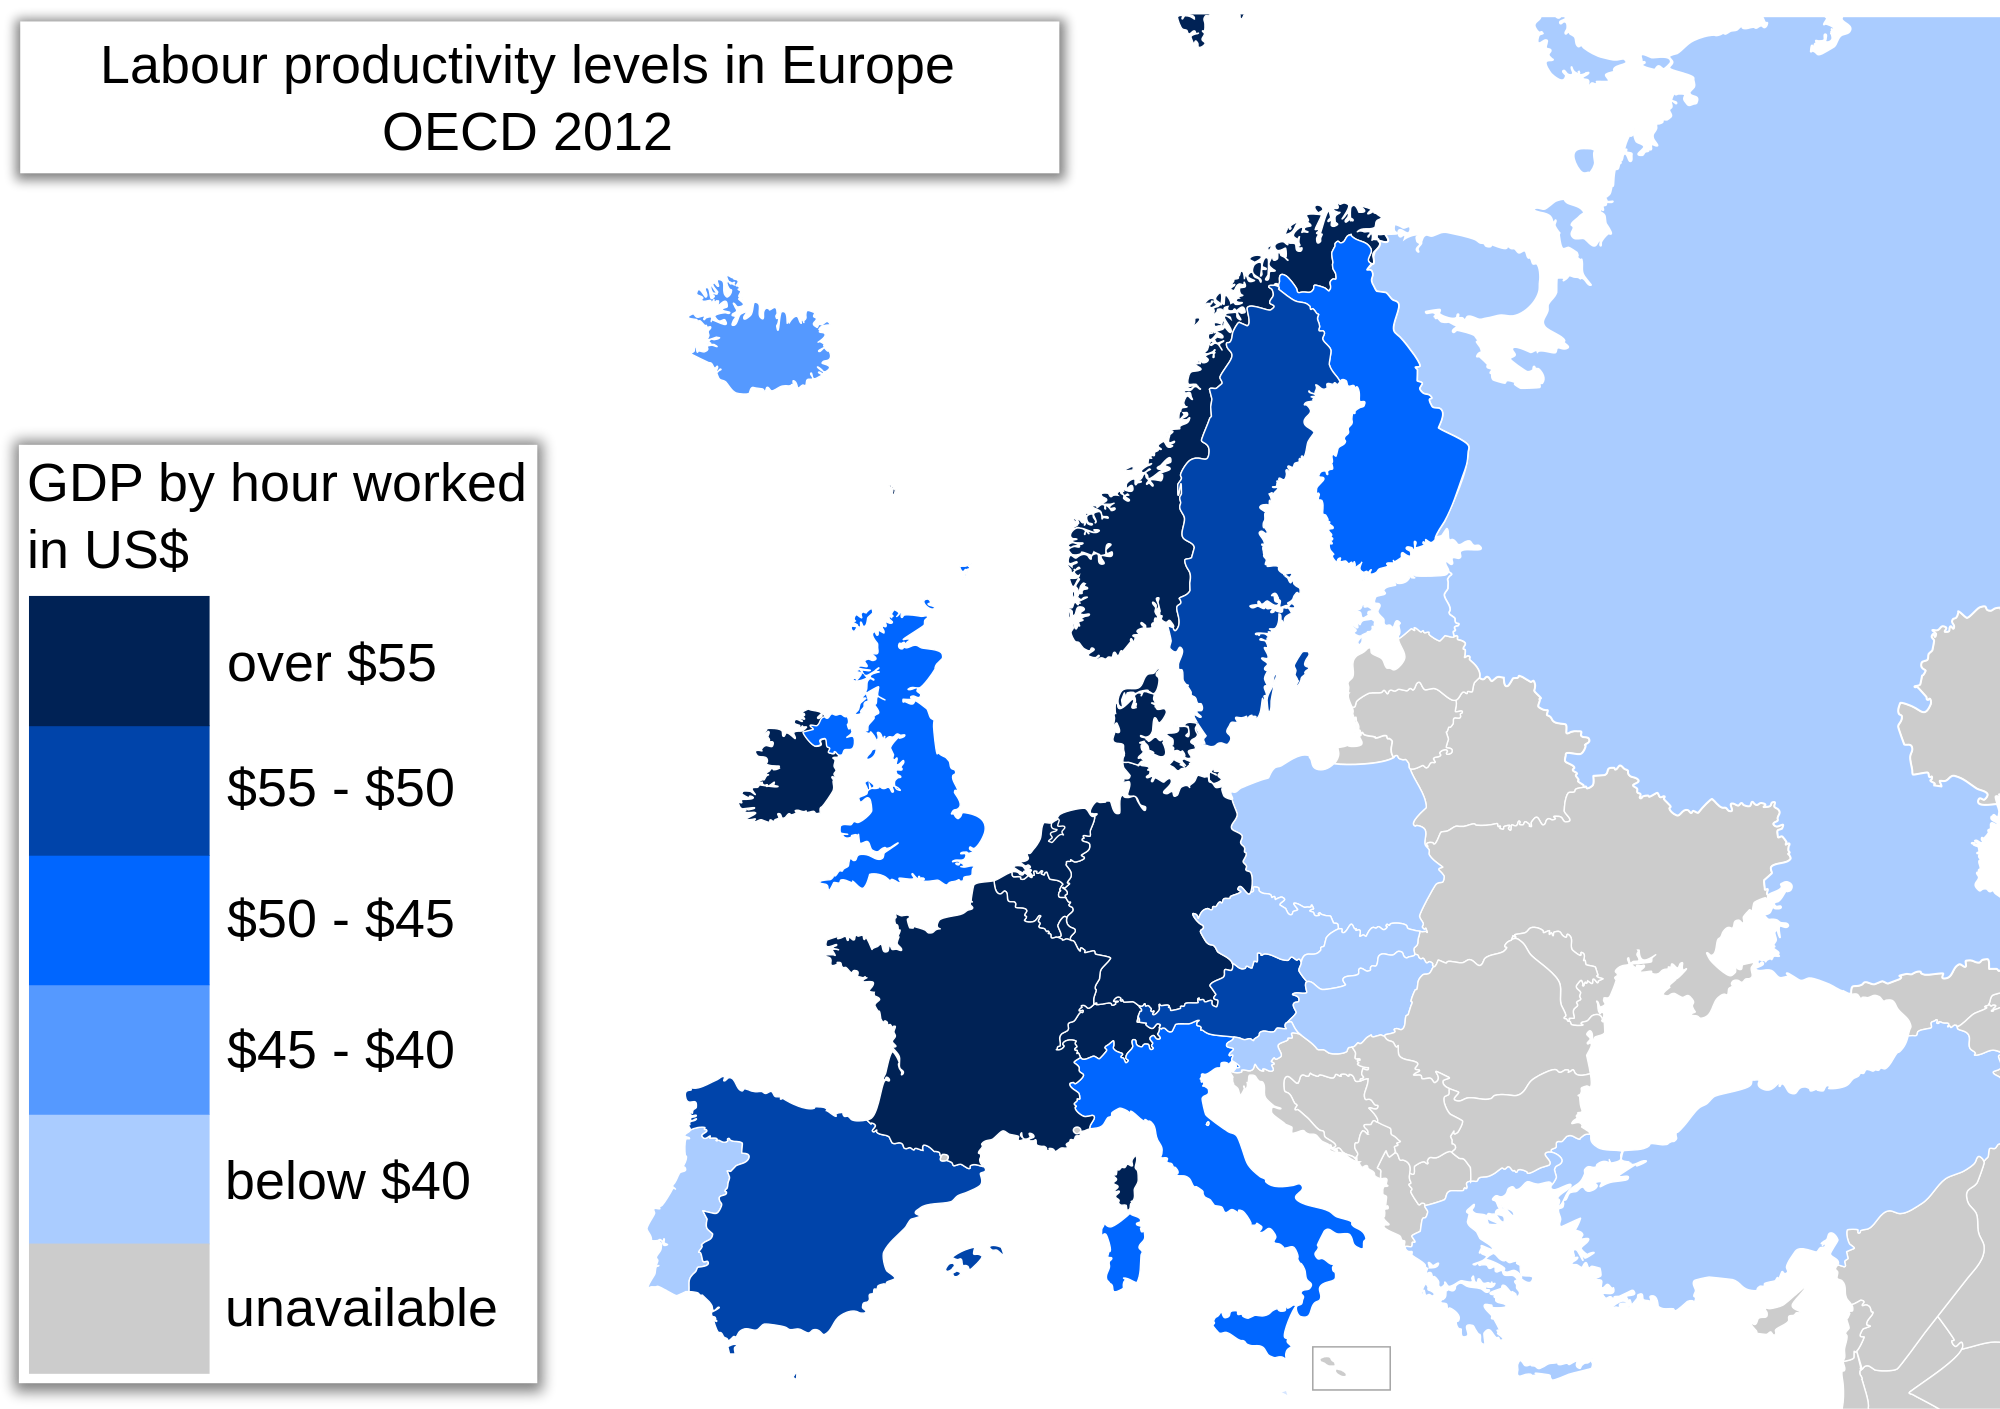 European Productivity, Especially In Franco-German Euro Zone, Has Long Been Higher Than In the USA. So The Scorn Of US Economists Should Consider This Important Fact 